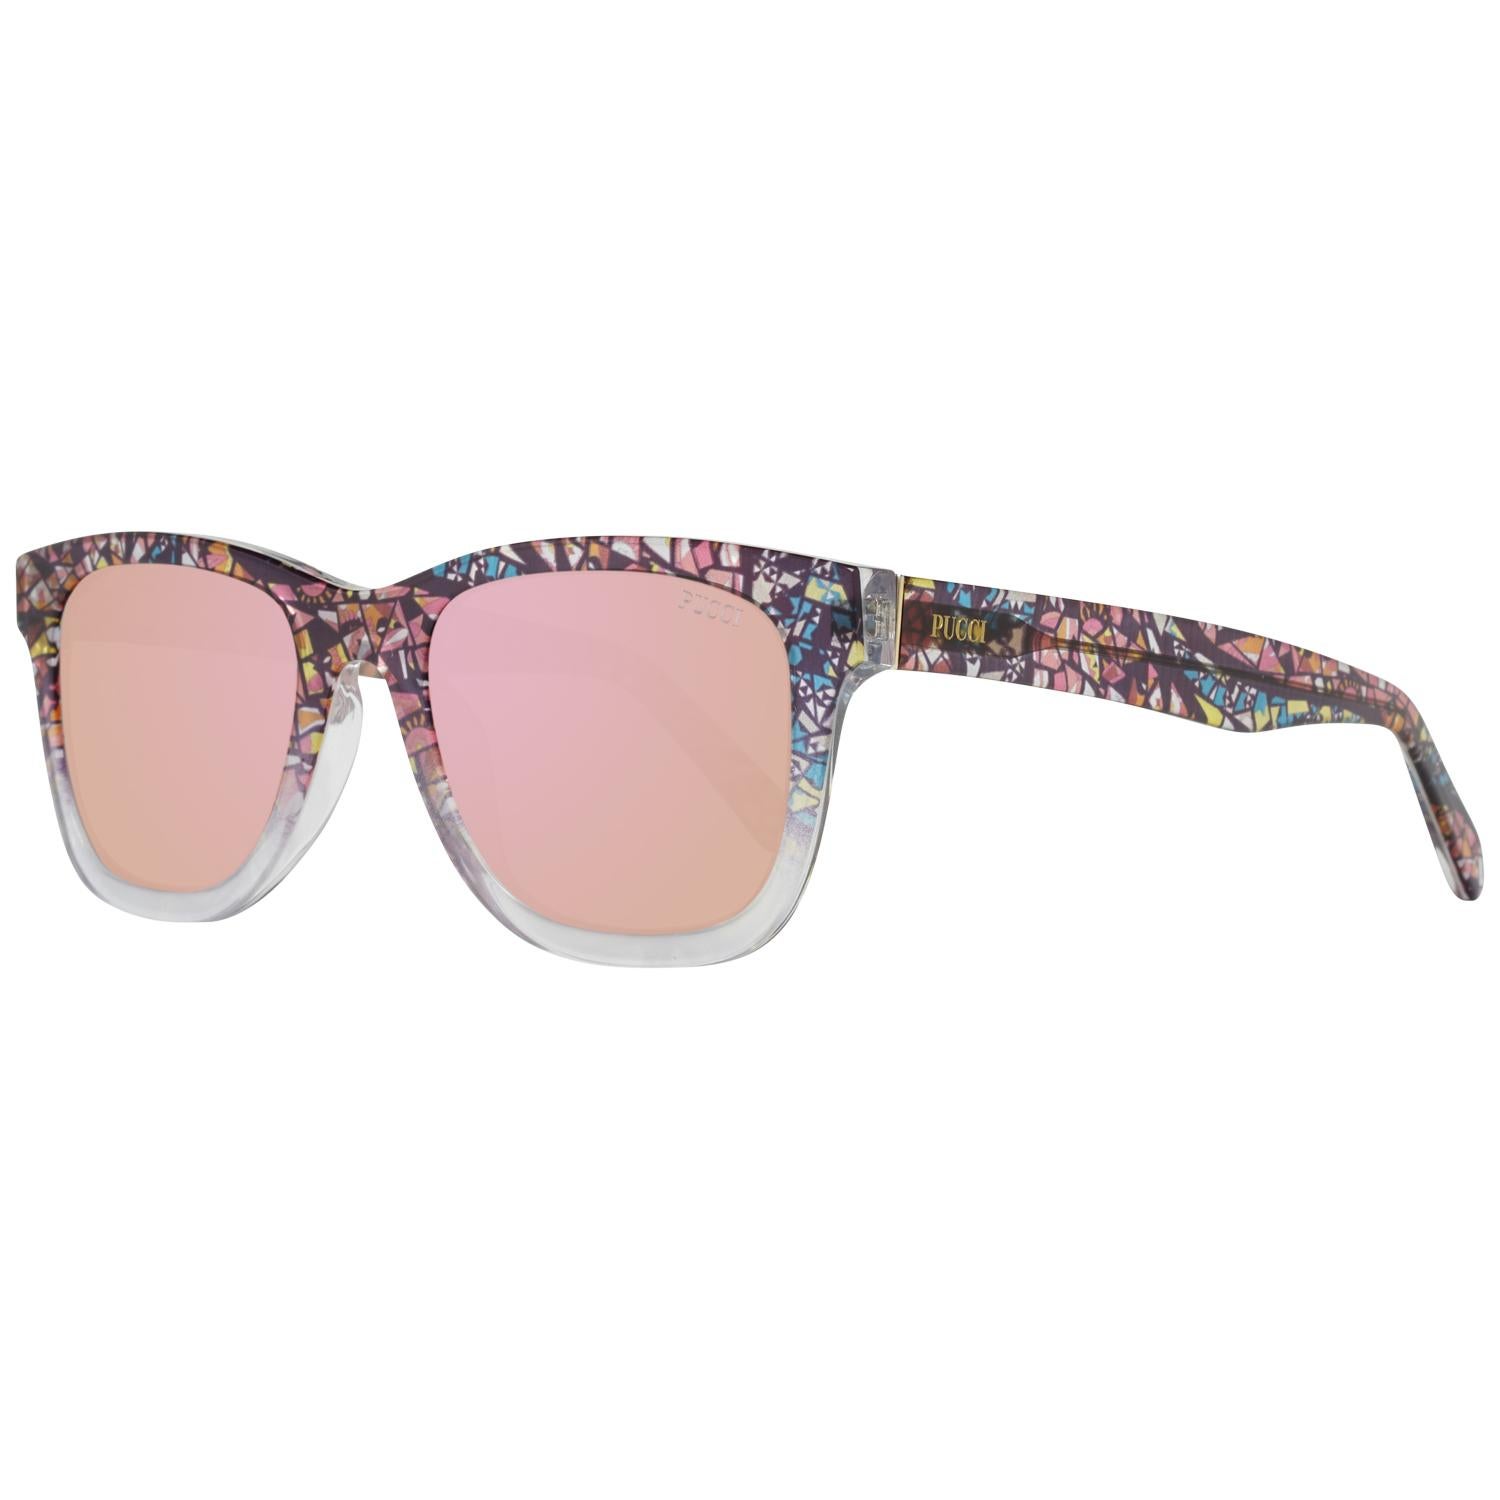 Details

MATERIAL: Acetate

COLOR: Multicolor

MODEL: EP0054 5127Z

GENDER: Women

COUNTRY OF MANUFACTURE: Italy

TYPE: Sunglasses

ORIGINAL CASE?: Yes

STYLE: Trapezium

OCCASION: Casual

FEATURES: Lightweight

LENS COLOR: Pink

LENS TECHNOLOGY: